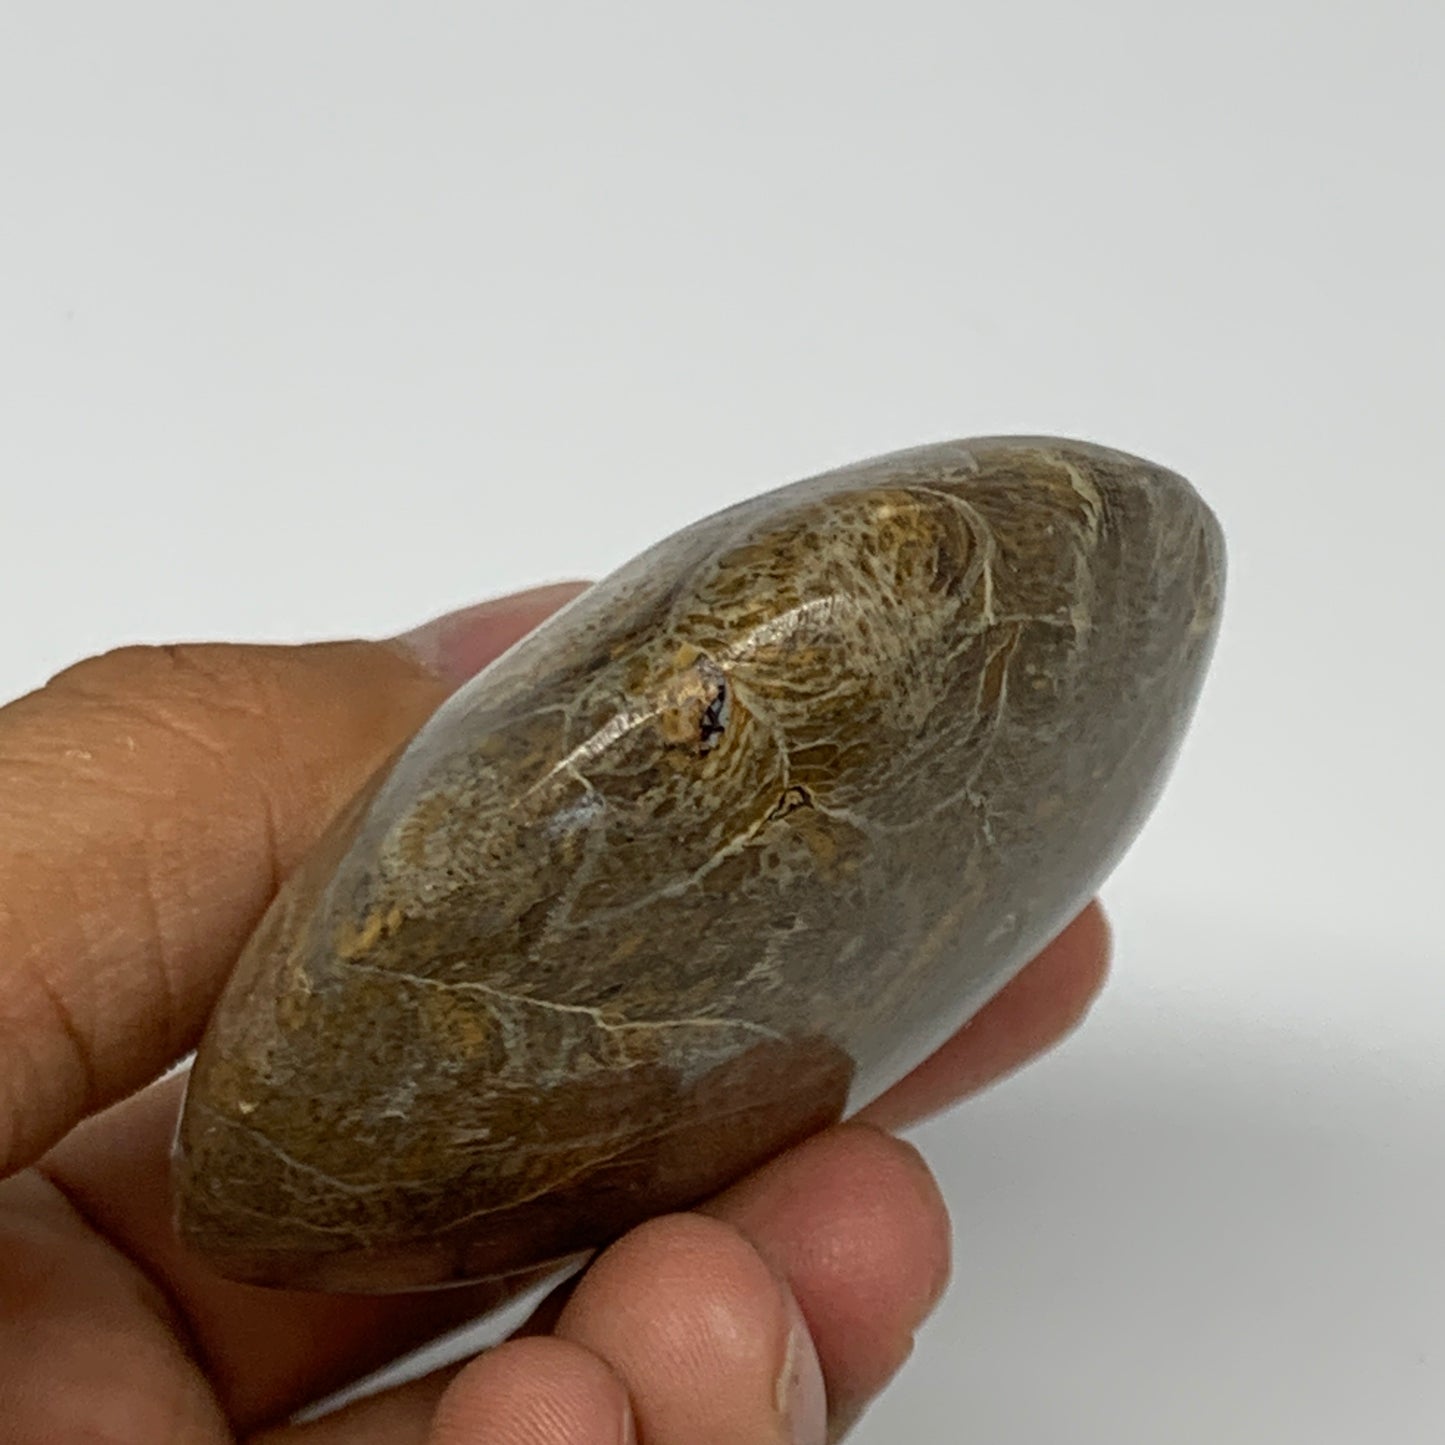 132.1g,2.7"x2.5"x 1", Coral Fossils Palm-Stone Polished from Morocco, B20345